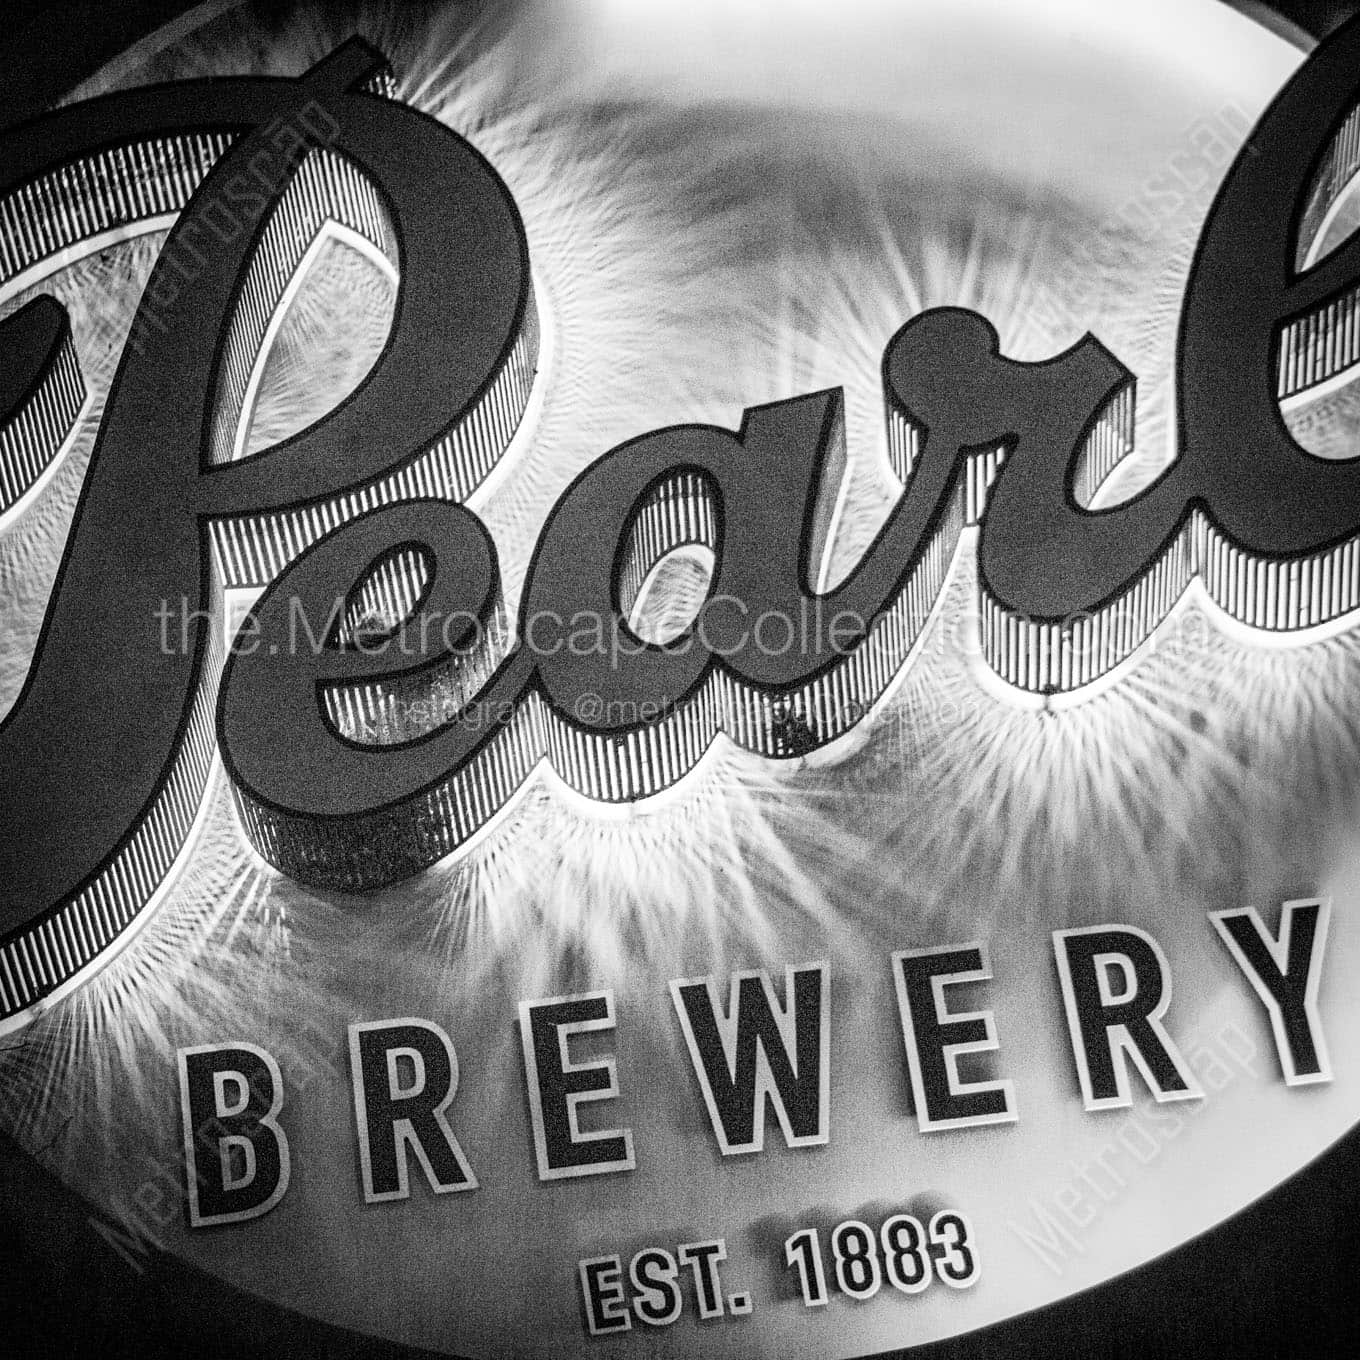 pearl brewery sign Black & White Wall Art